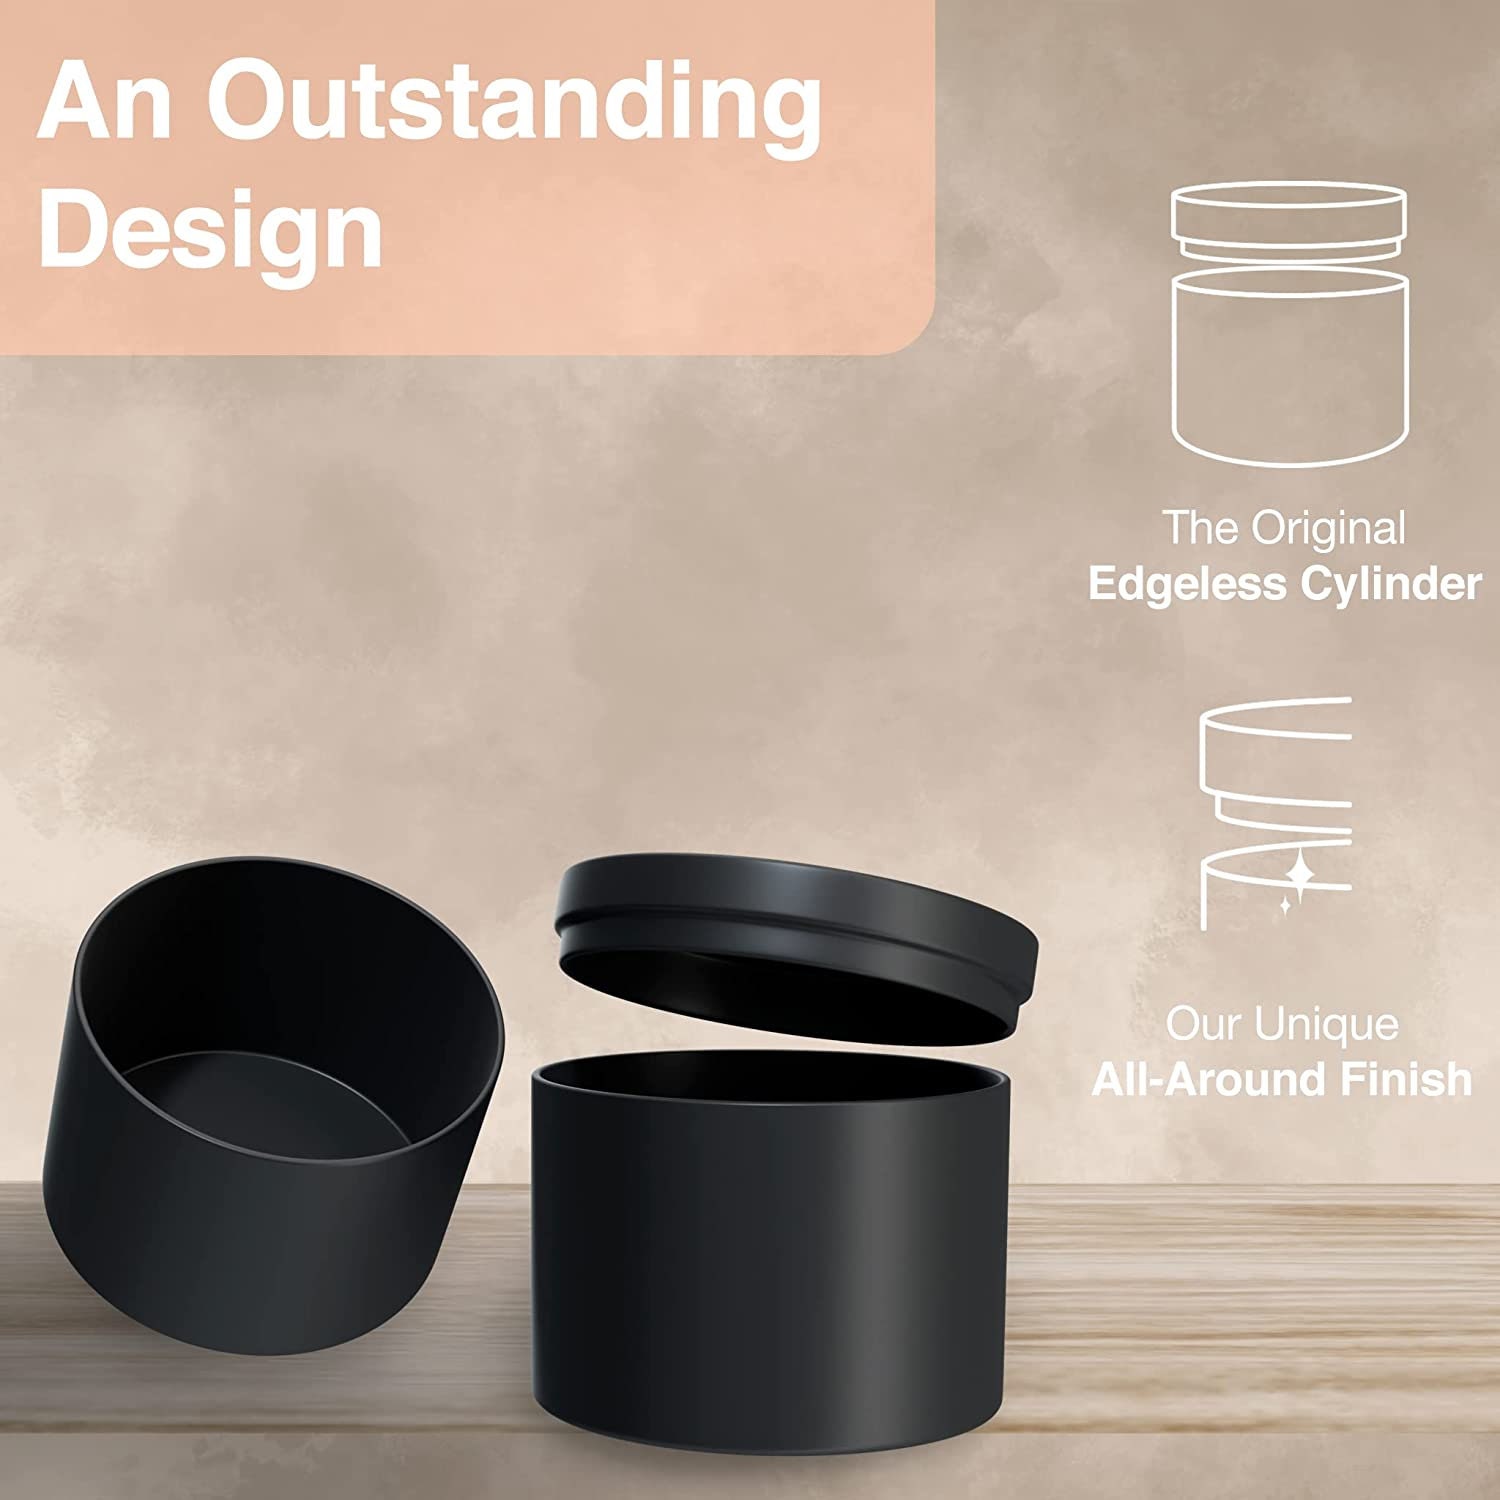 True Candle 24x Premium Matte Black Candle Tin 4 oz | The Original Edgeless Cylinder | Matte Finish Outside and Inside | Premium Candle Containers 